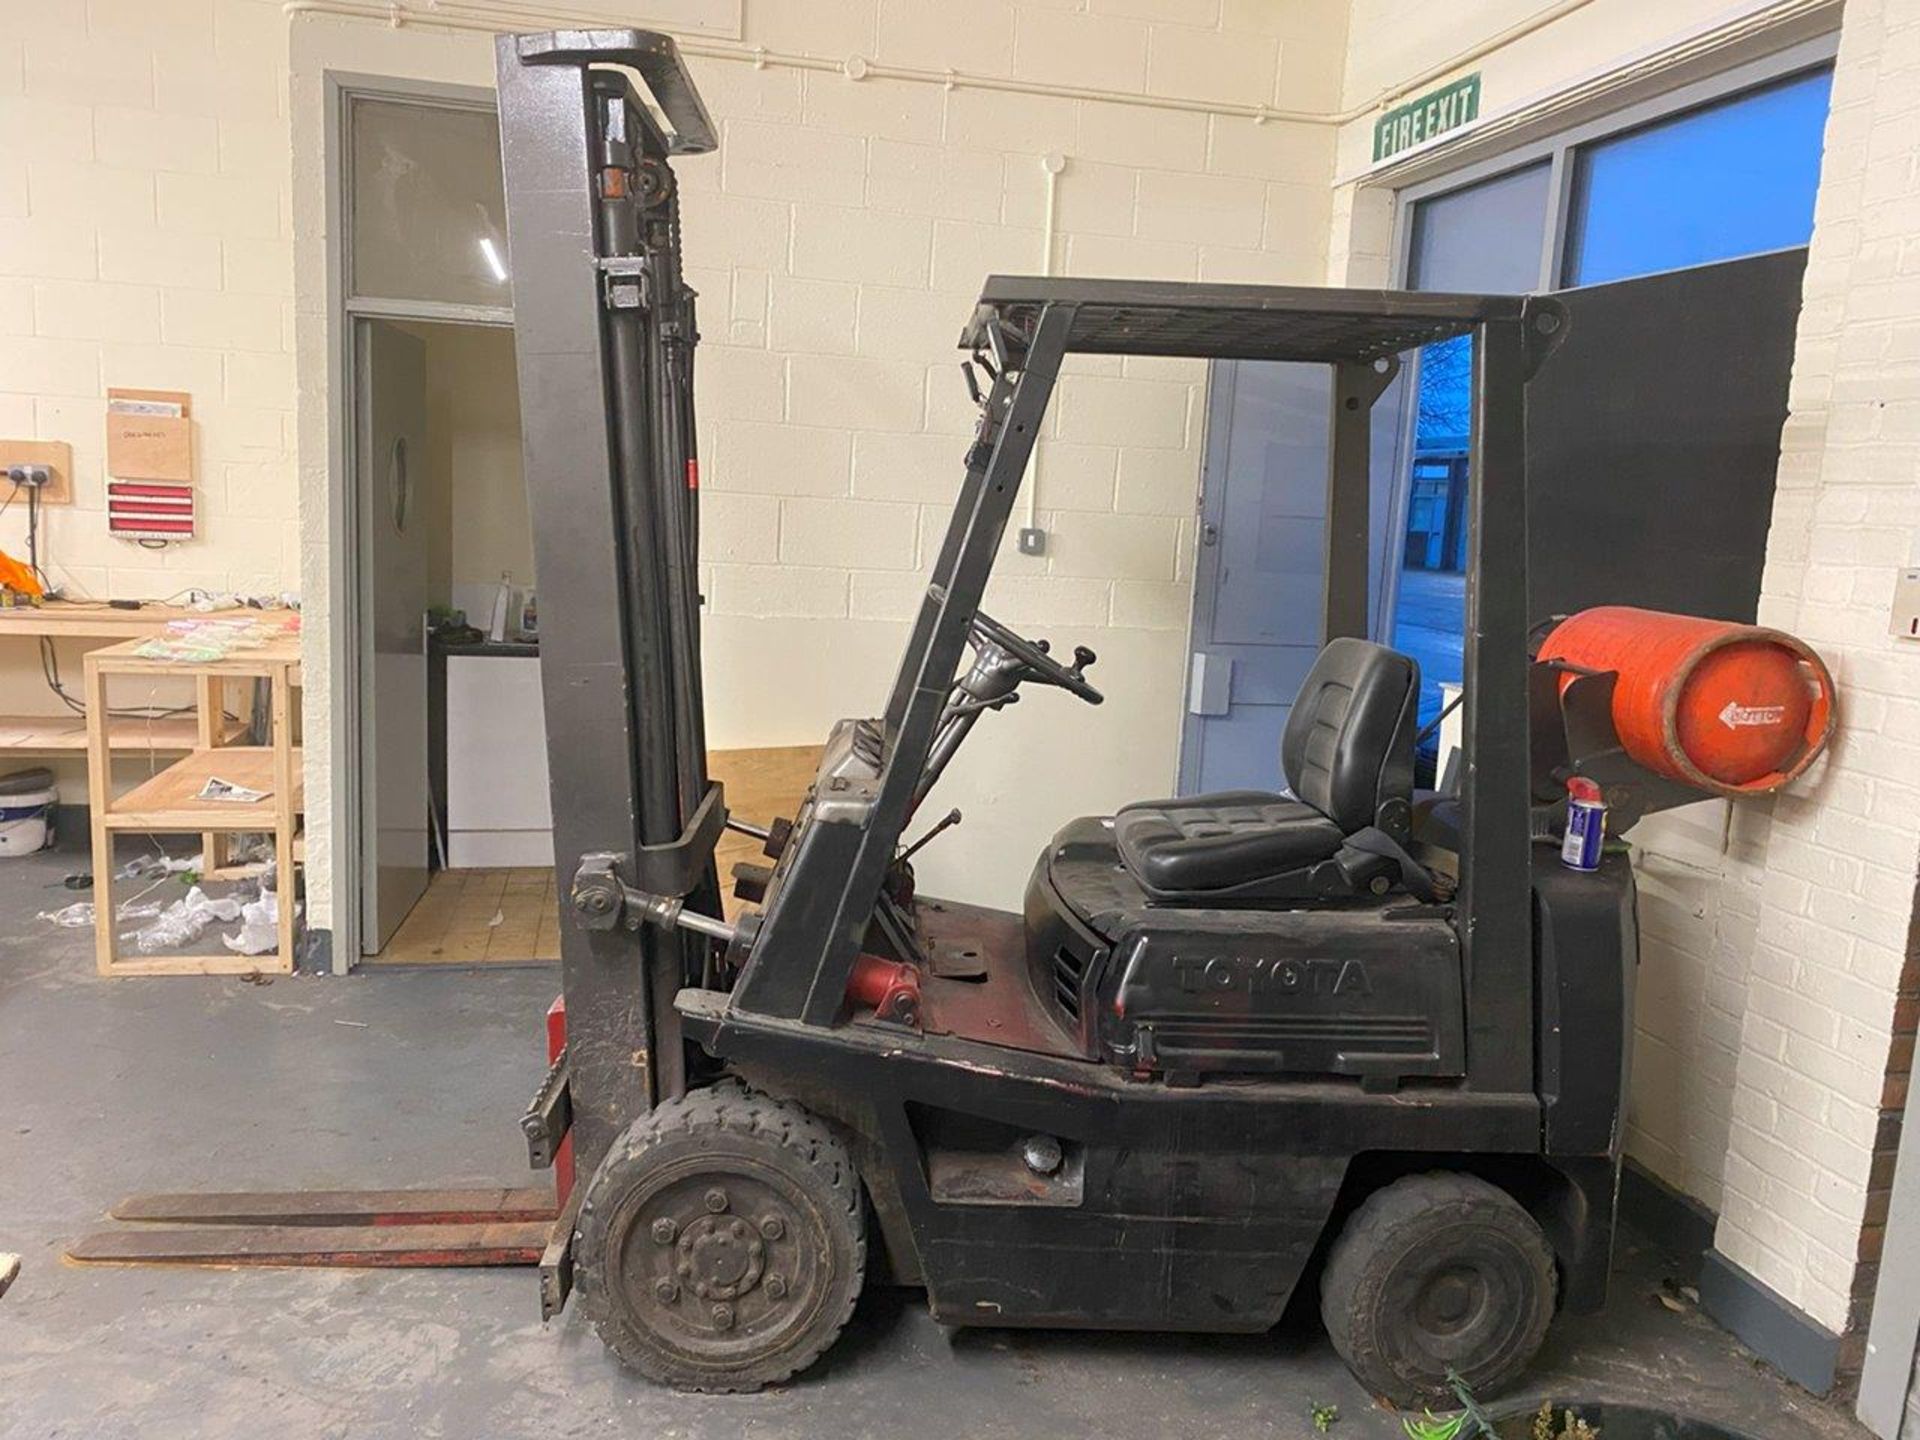 TOYOTA 404FGC 2.5 12685 LPG Forklift Truck; Hours: 6216.9; Capacity: 4000LBs at 151.5in - Image 3 of 10